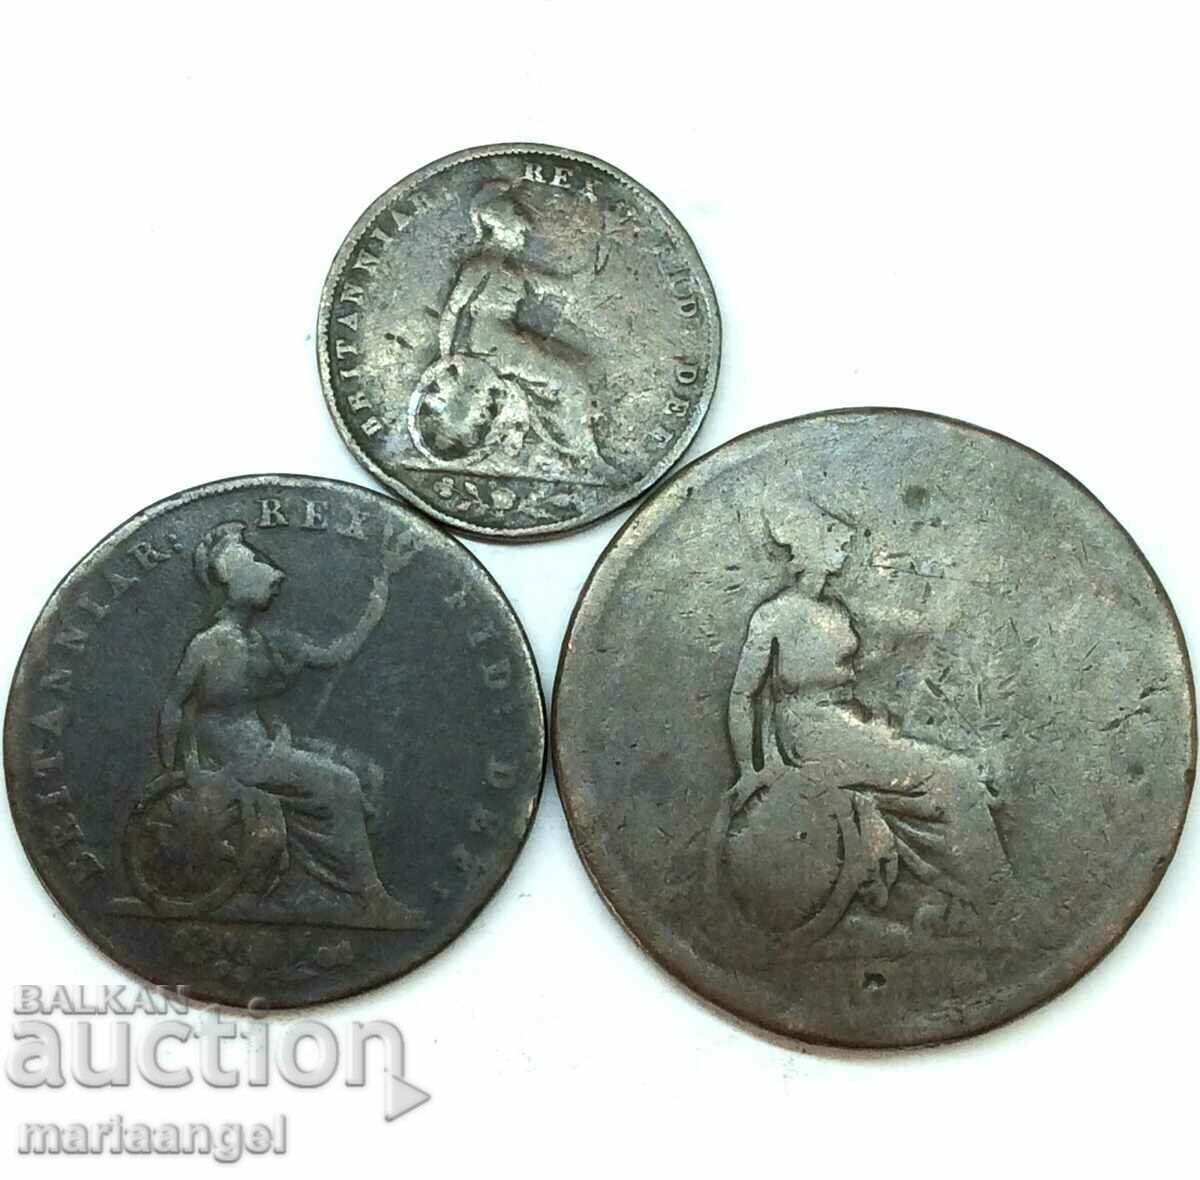 Great Britain 1 Farthing + 1/2 Penny 1826 + 1 Penny 1825 Bronze